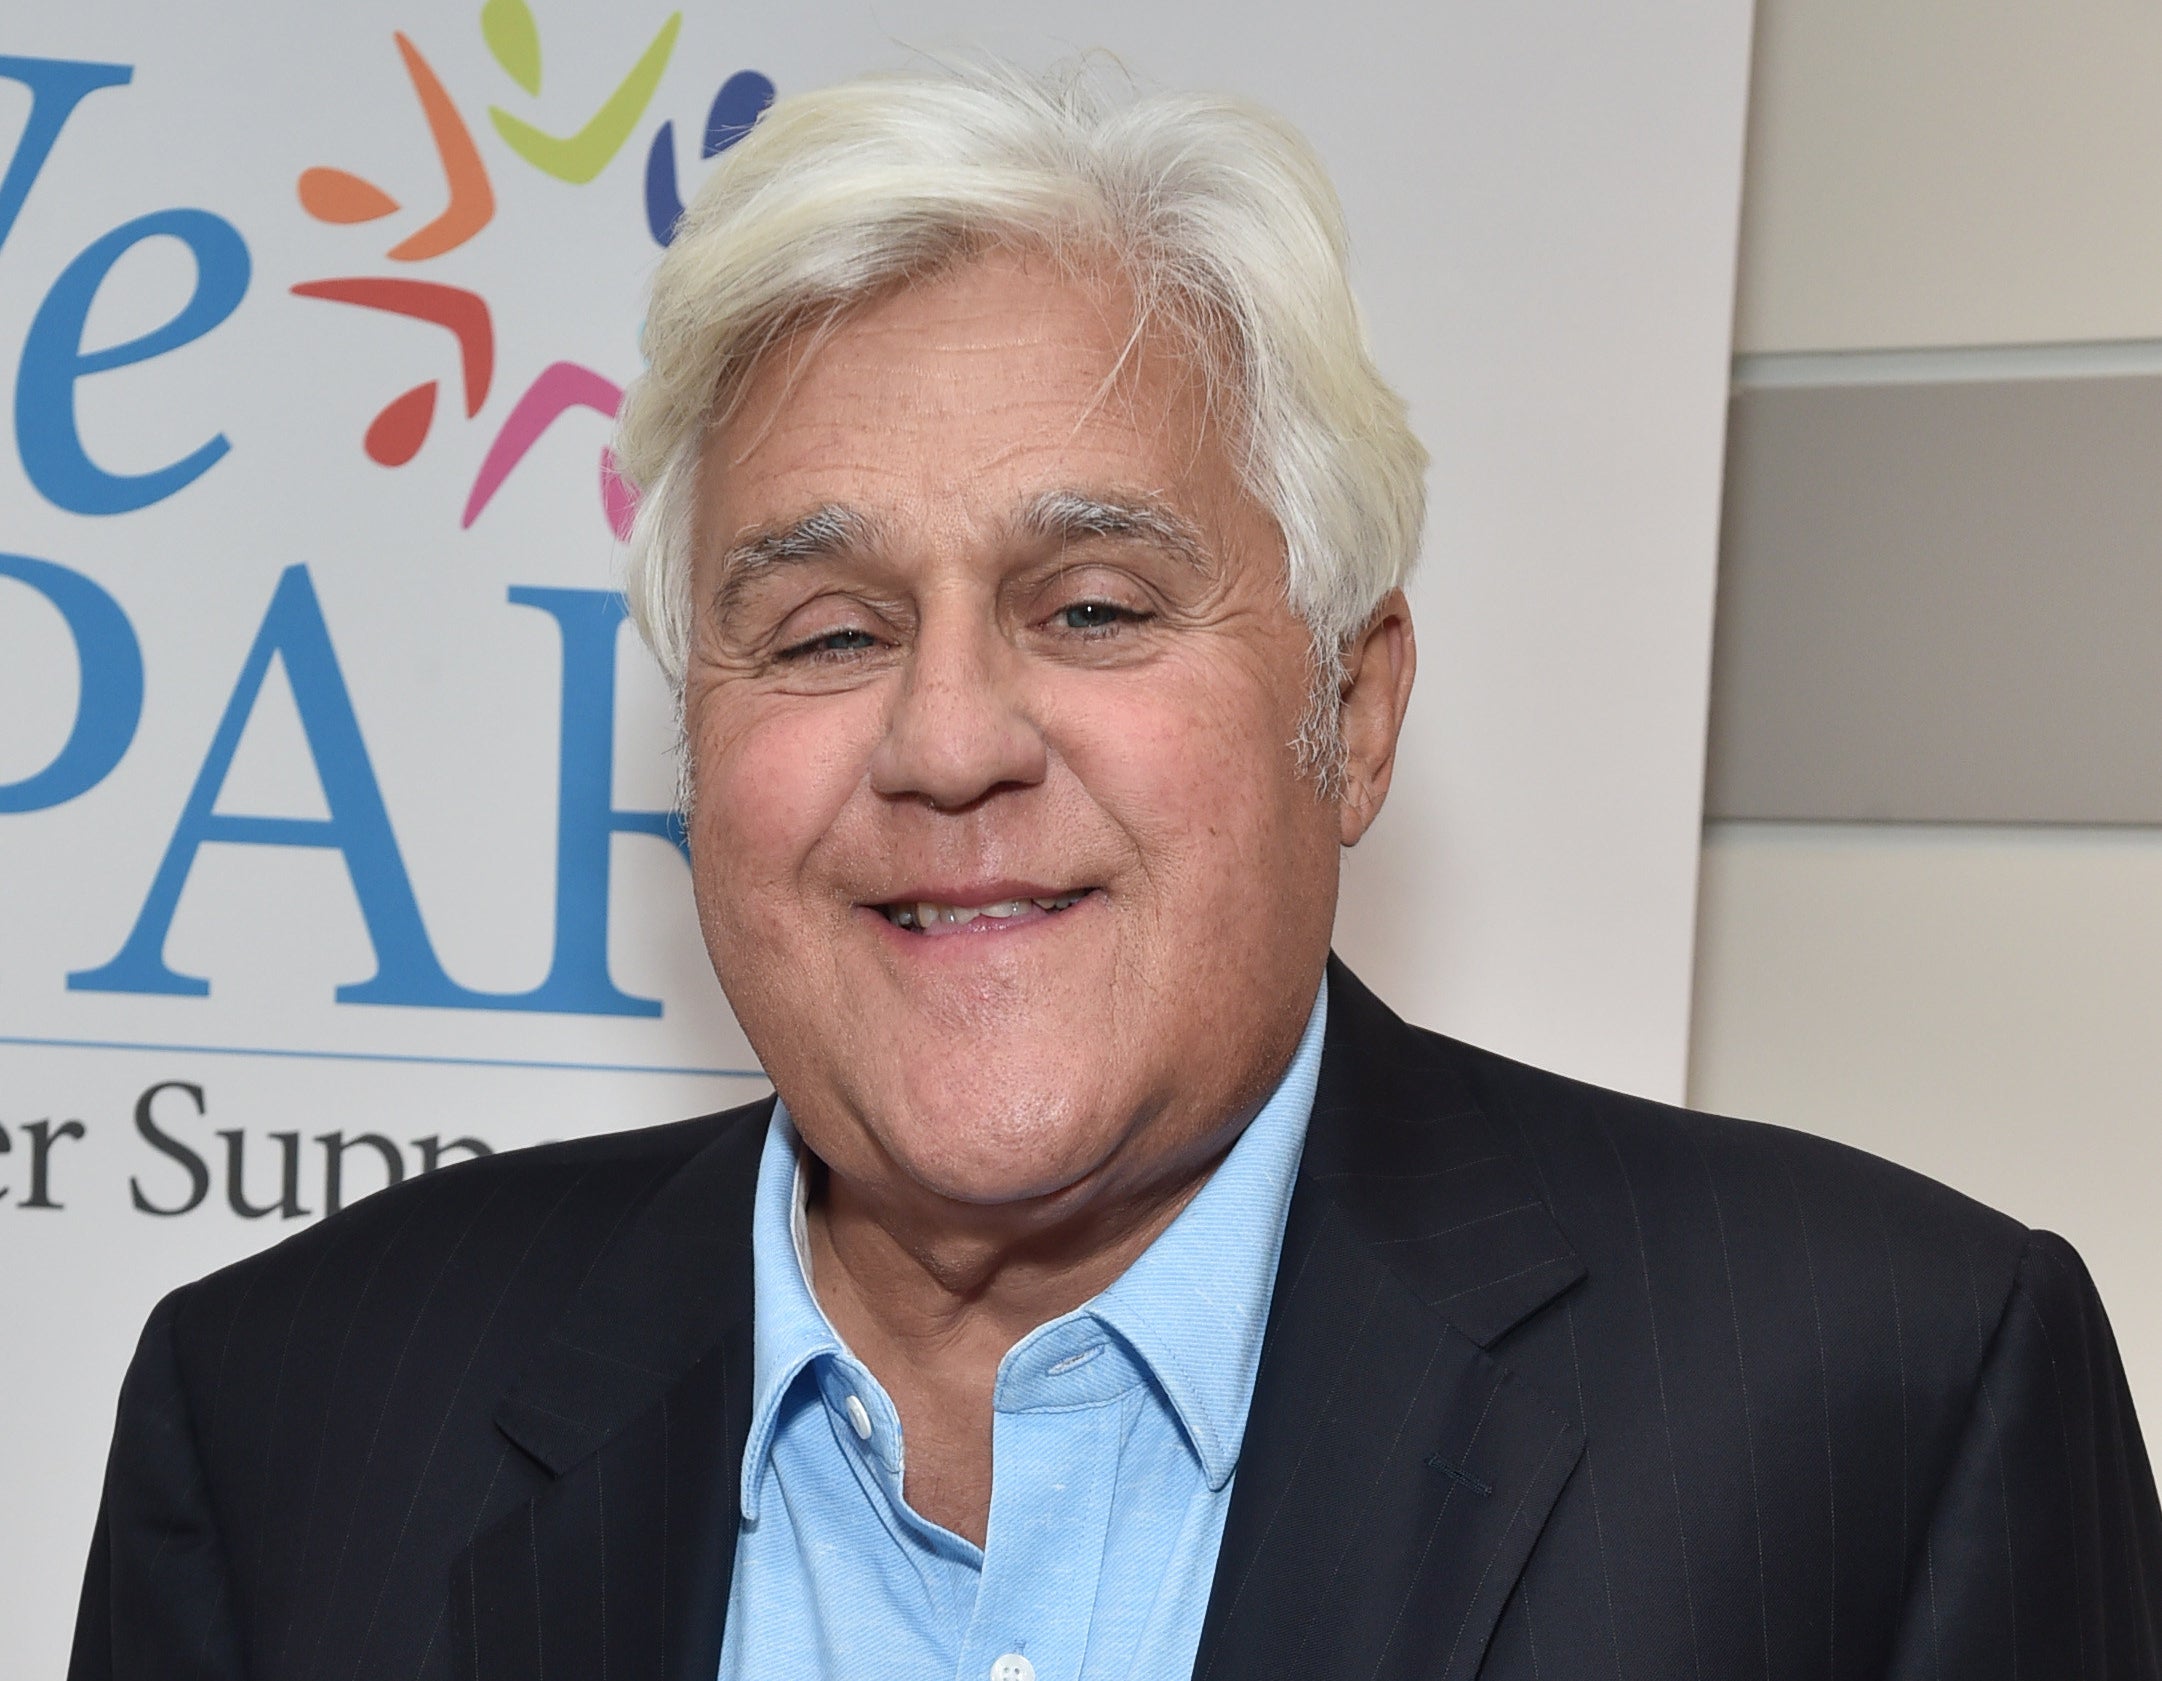 jay leno in a light blue shirt and striped blazer